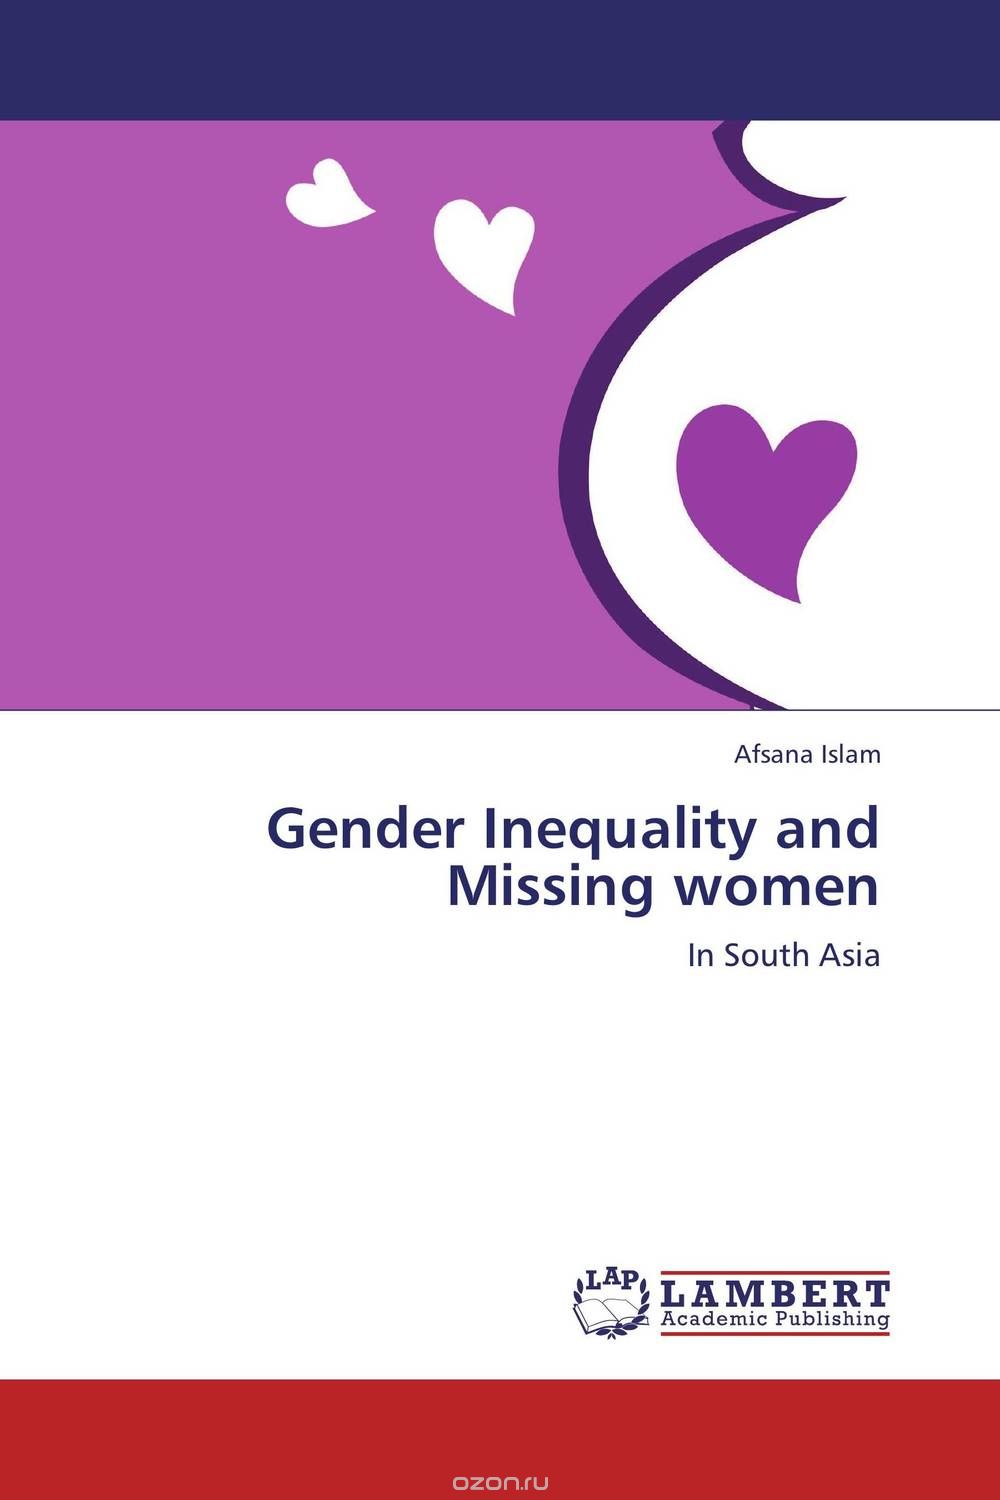 Gender Inequality and Missing women